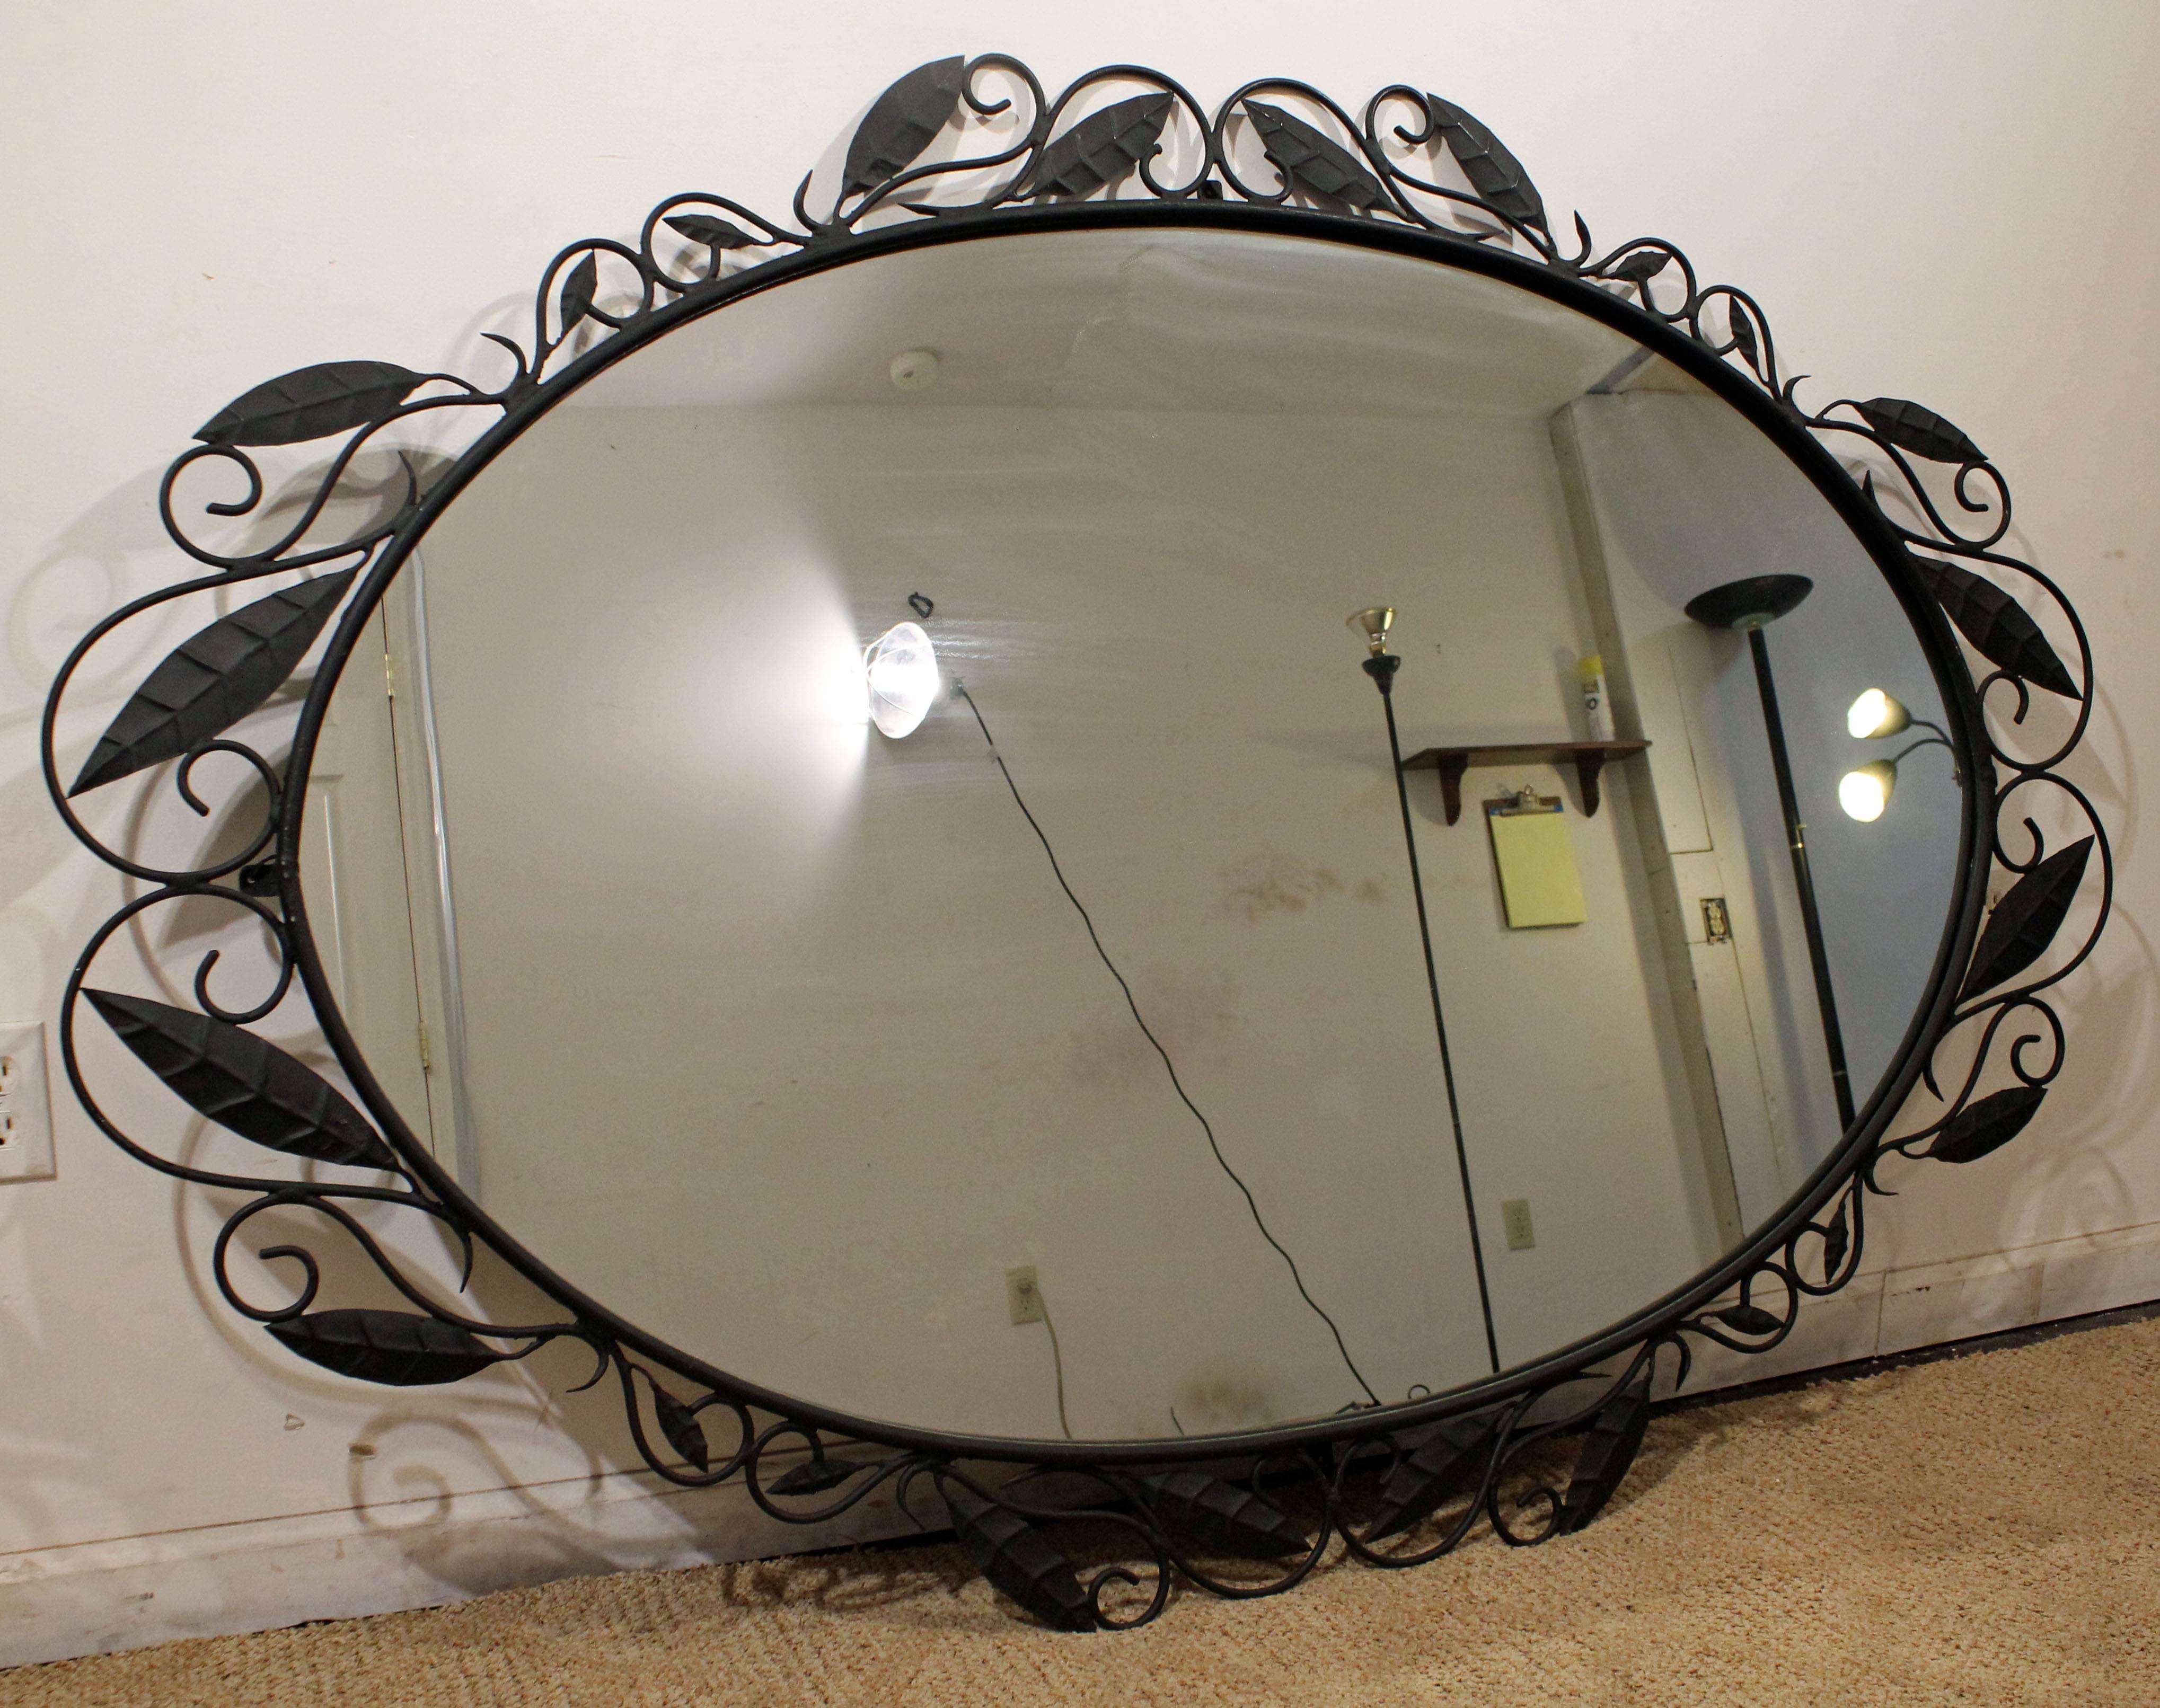 Offered is a large oversized Italian wrought iron mirror. This mirror is made of wrought iron. It is in great condition, showing minor wear (minor paint chips on iron, age wear-see pics). It is not signed.

Dimensions: 48' x 70